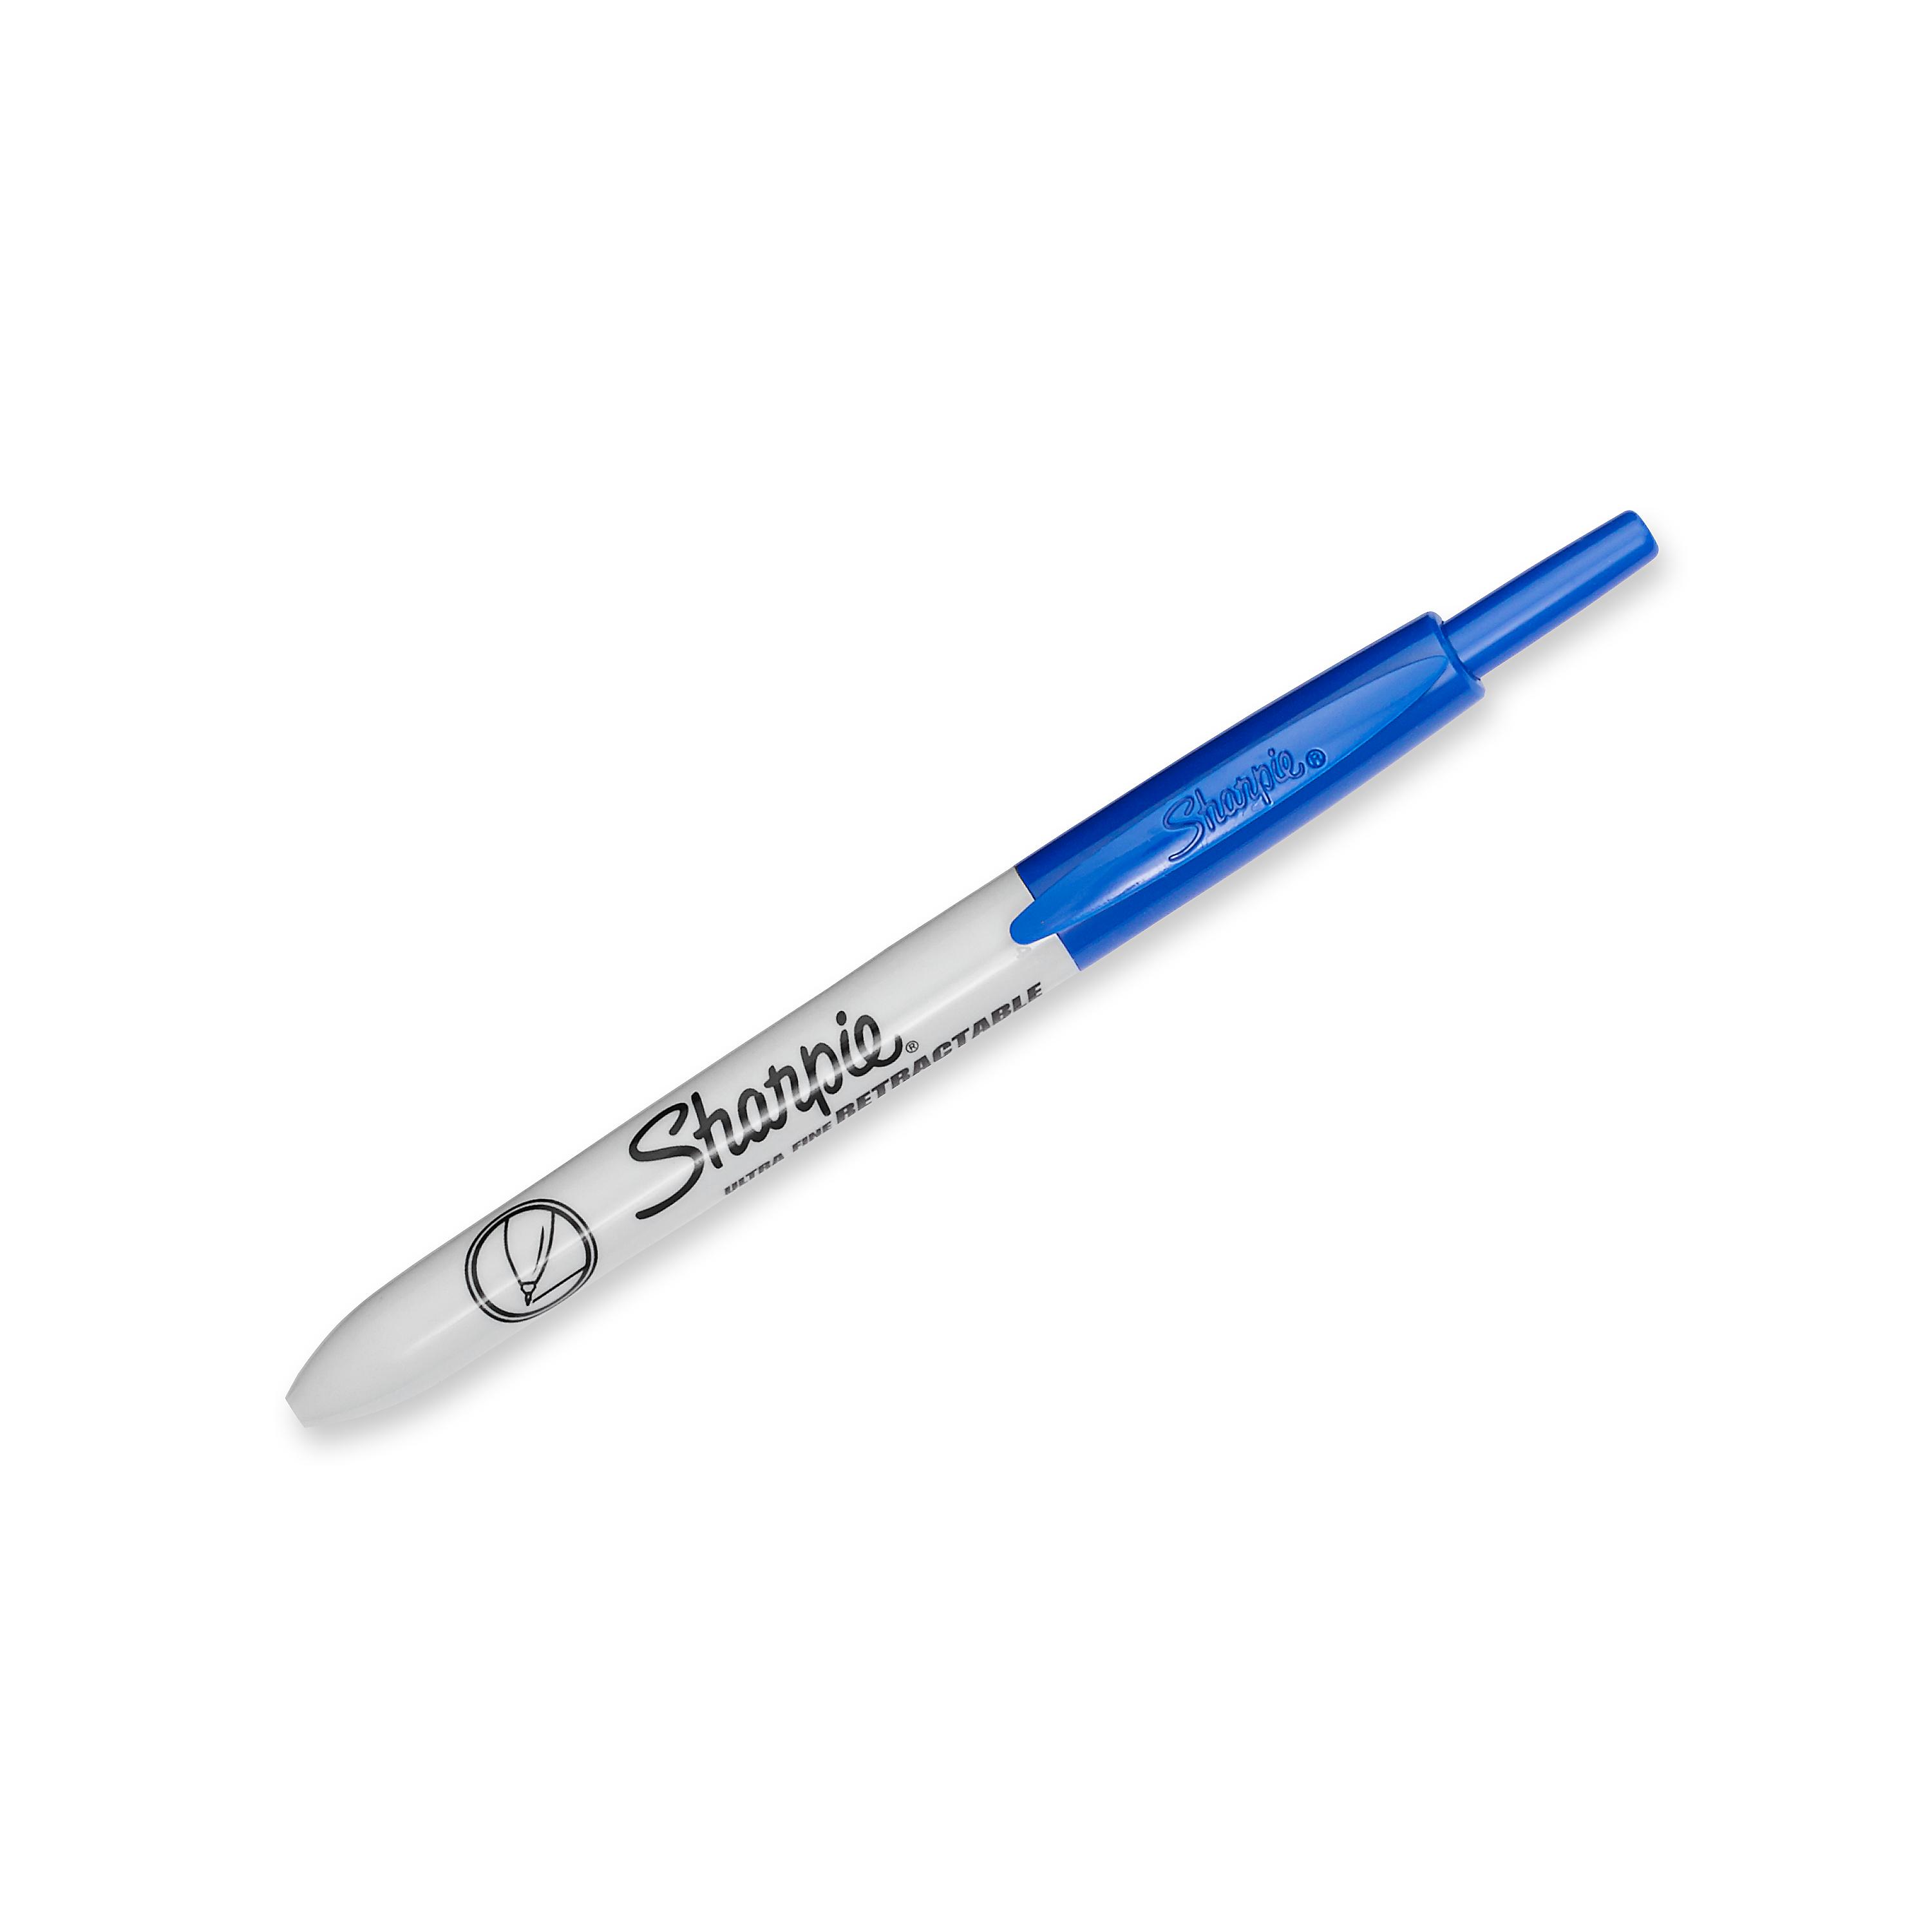 <b>   Proudly Permanent Ink   </b></br>   Made to mark and stand out on almost every surface, iconic Sharpie permanent ink is quick drying and water- and fade-resistant. 